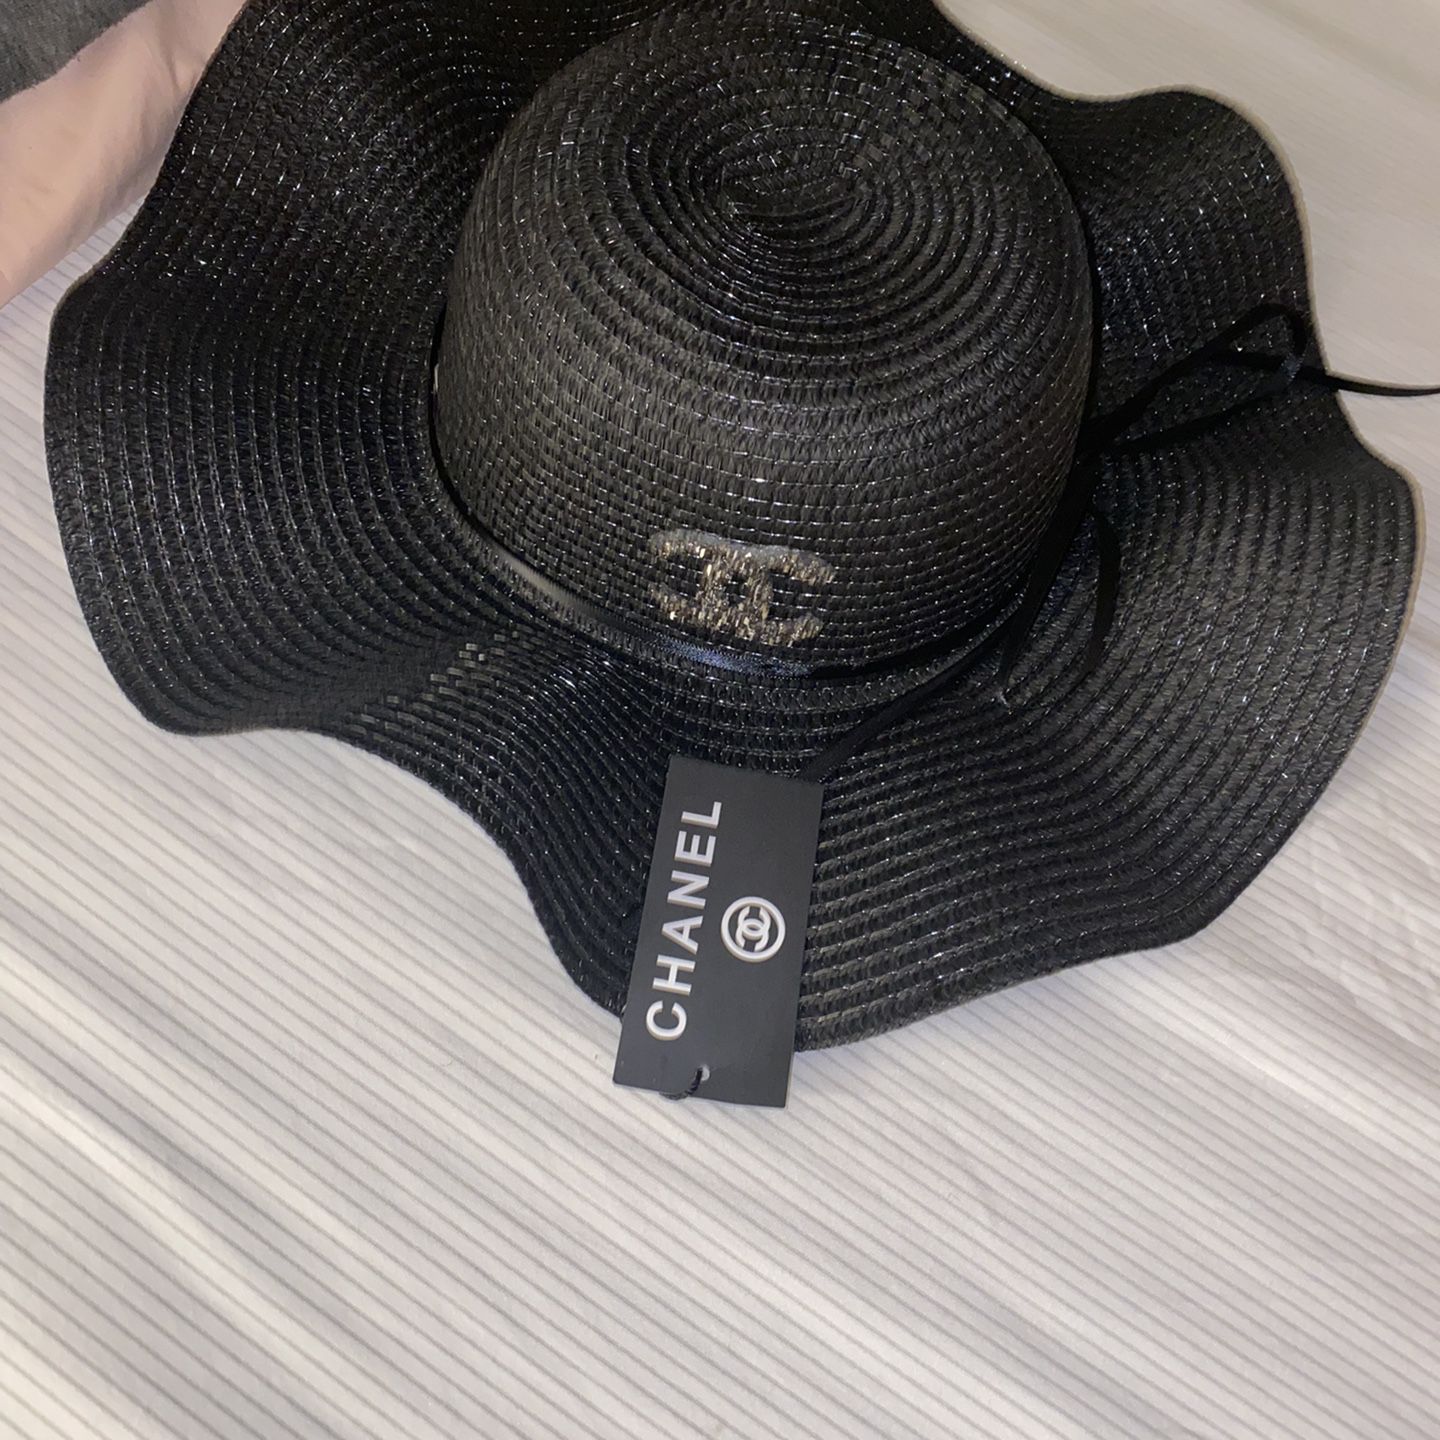 Chanel Hat for Sale in Oxnard, CA - OfferUp